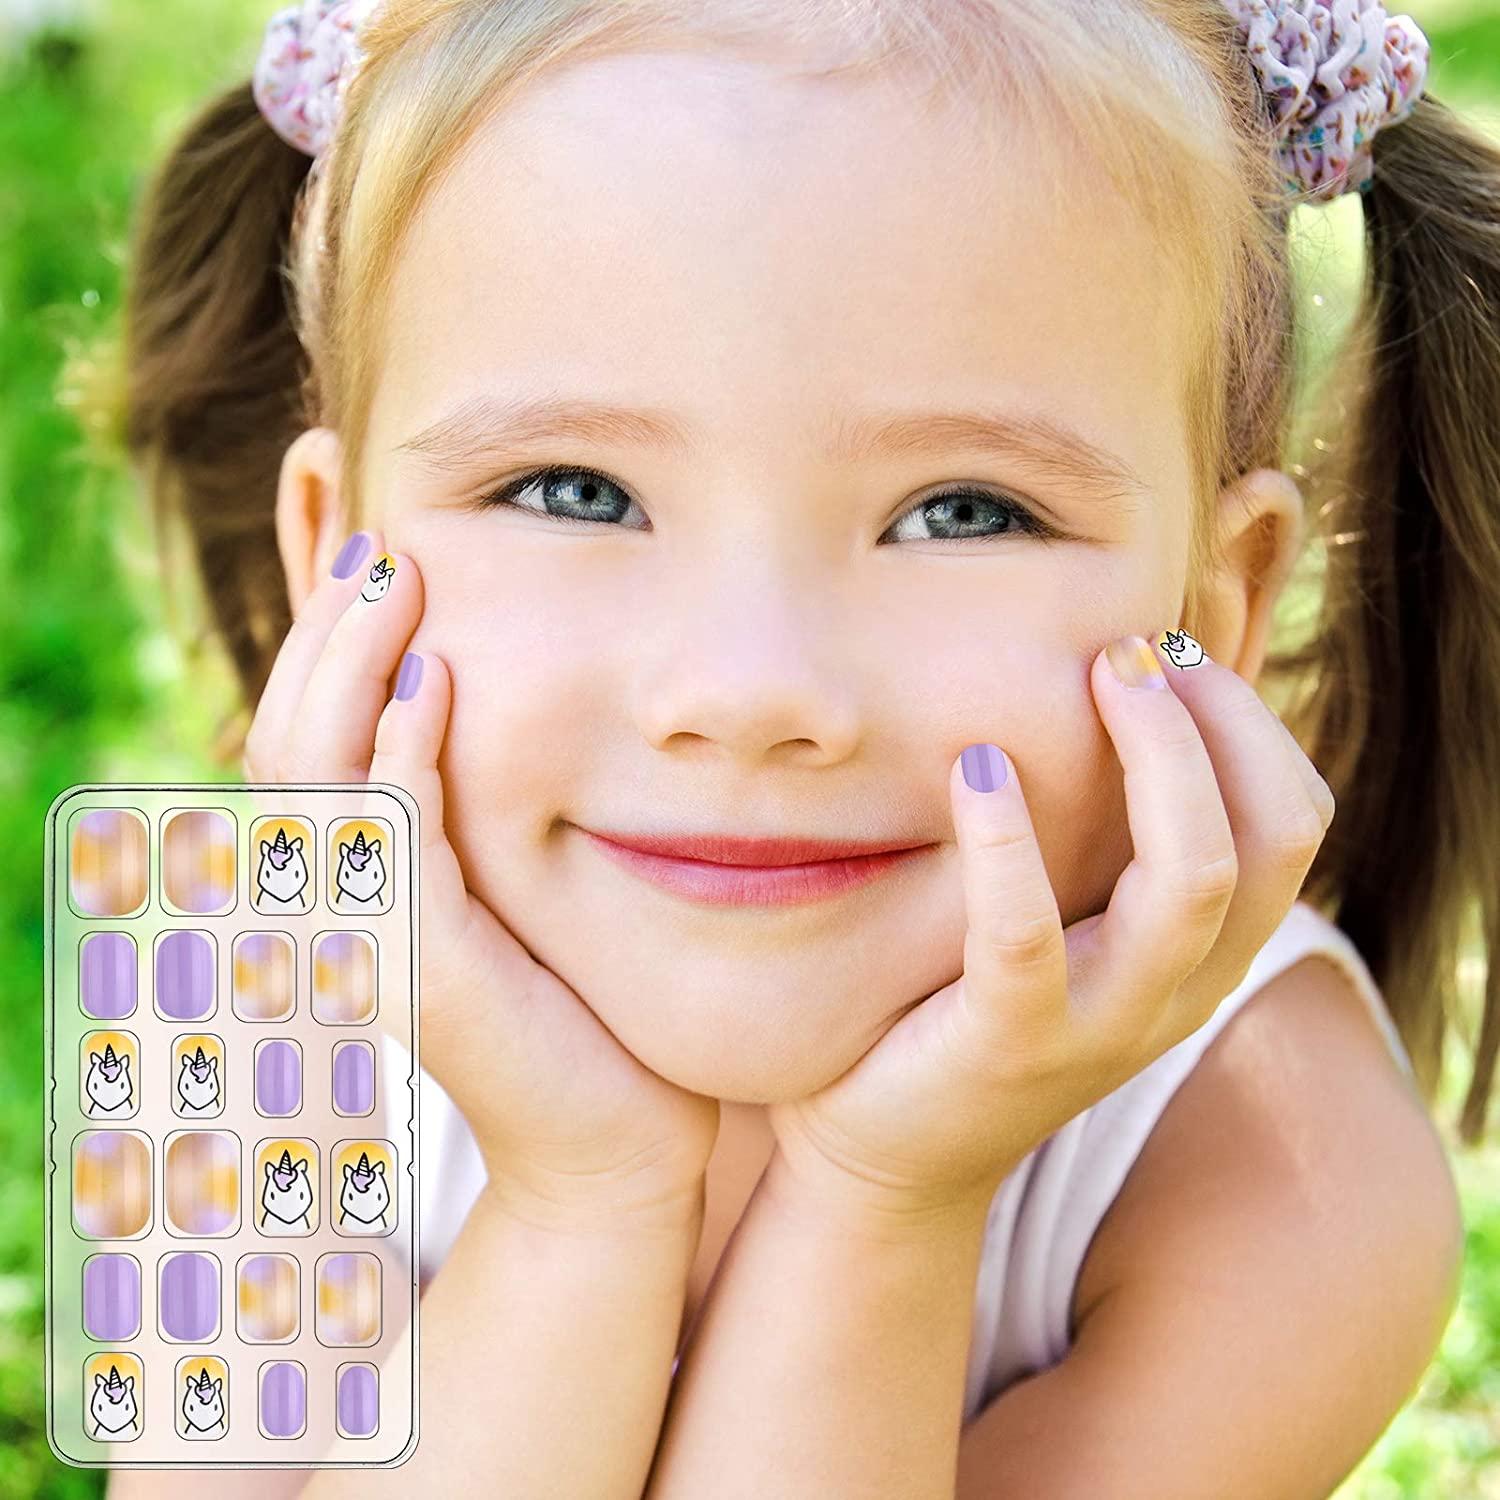 Buy 600 Pieces Children False Nails Natural Acrylic Nail Tips for Kids  Little Girls Short Full Cover Fake Nails Artificial Fingernail Decoration,  10 Sizes Online at Low Prices in India - Amazon.in